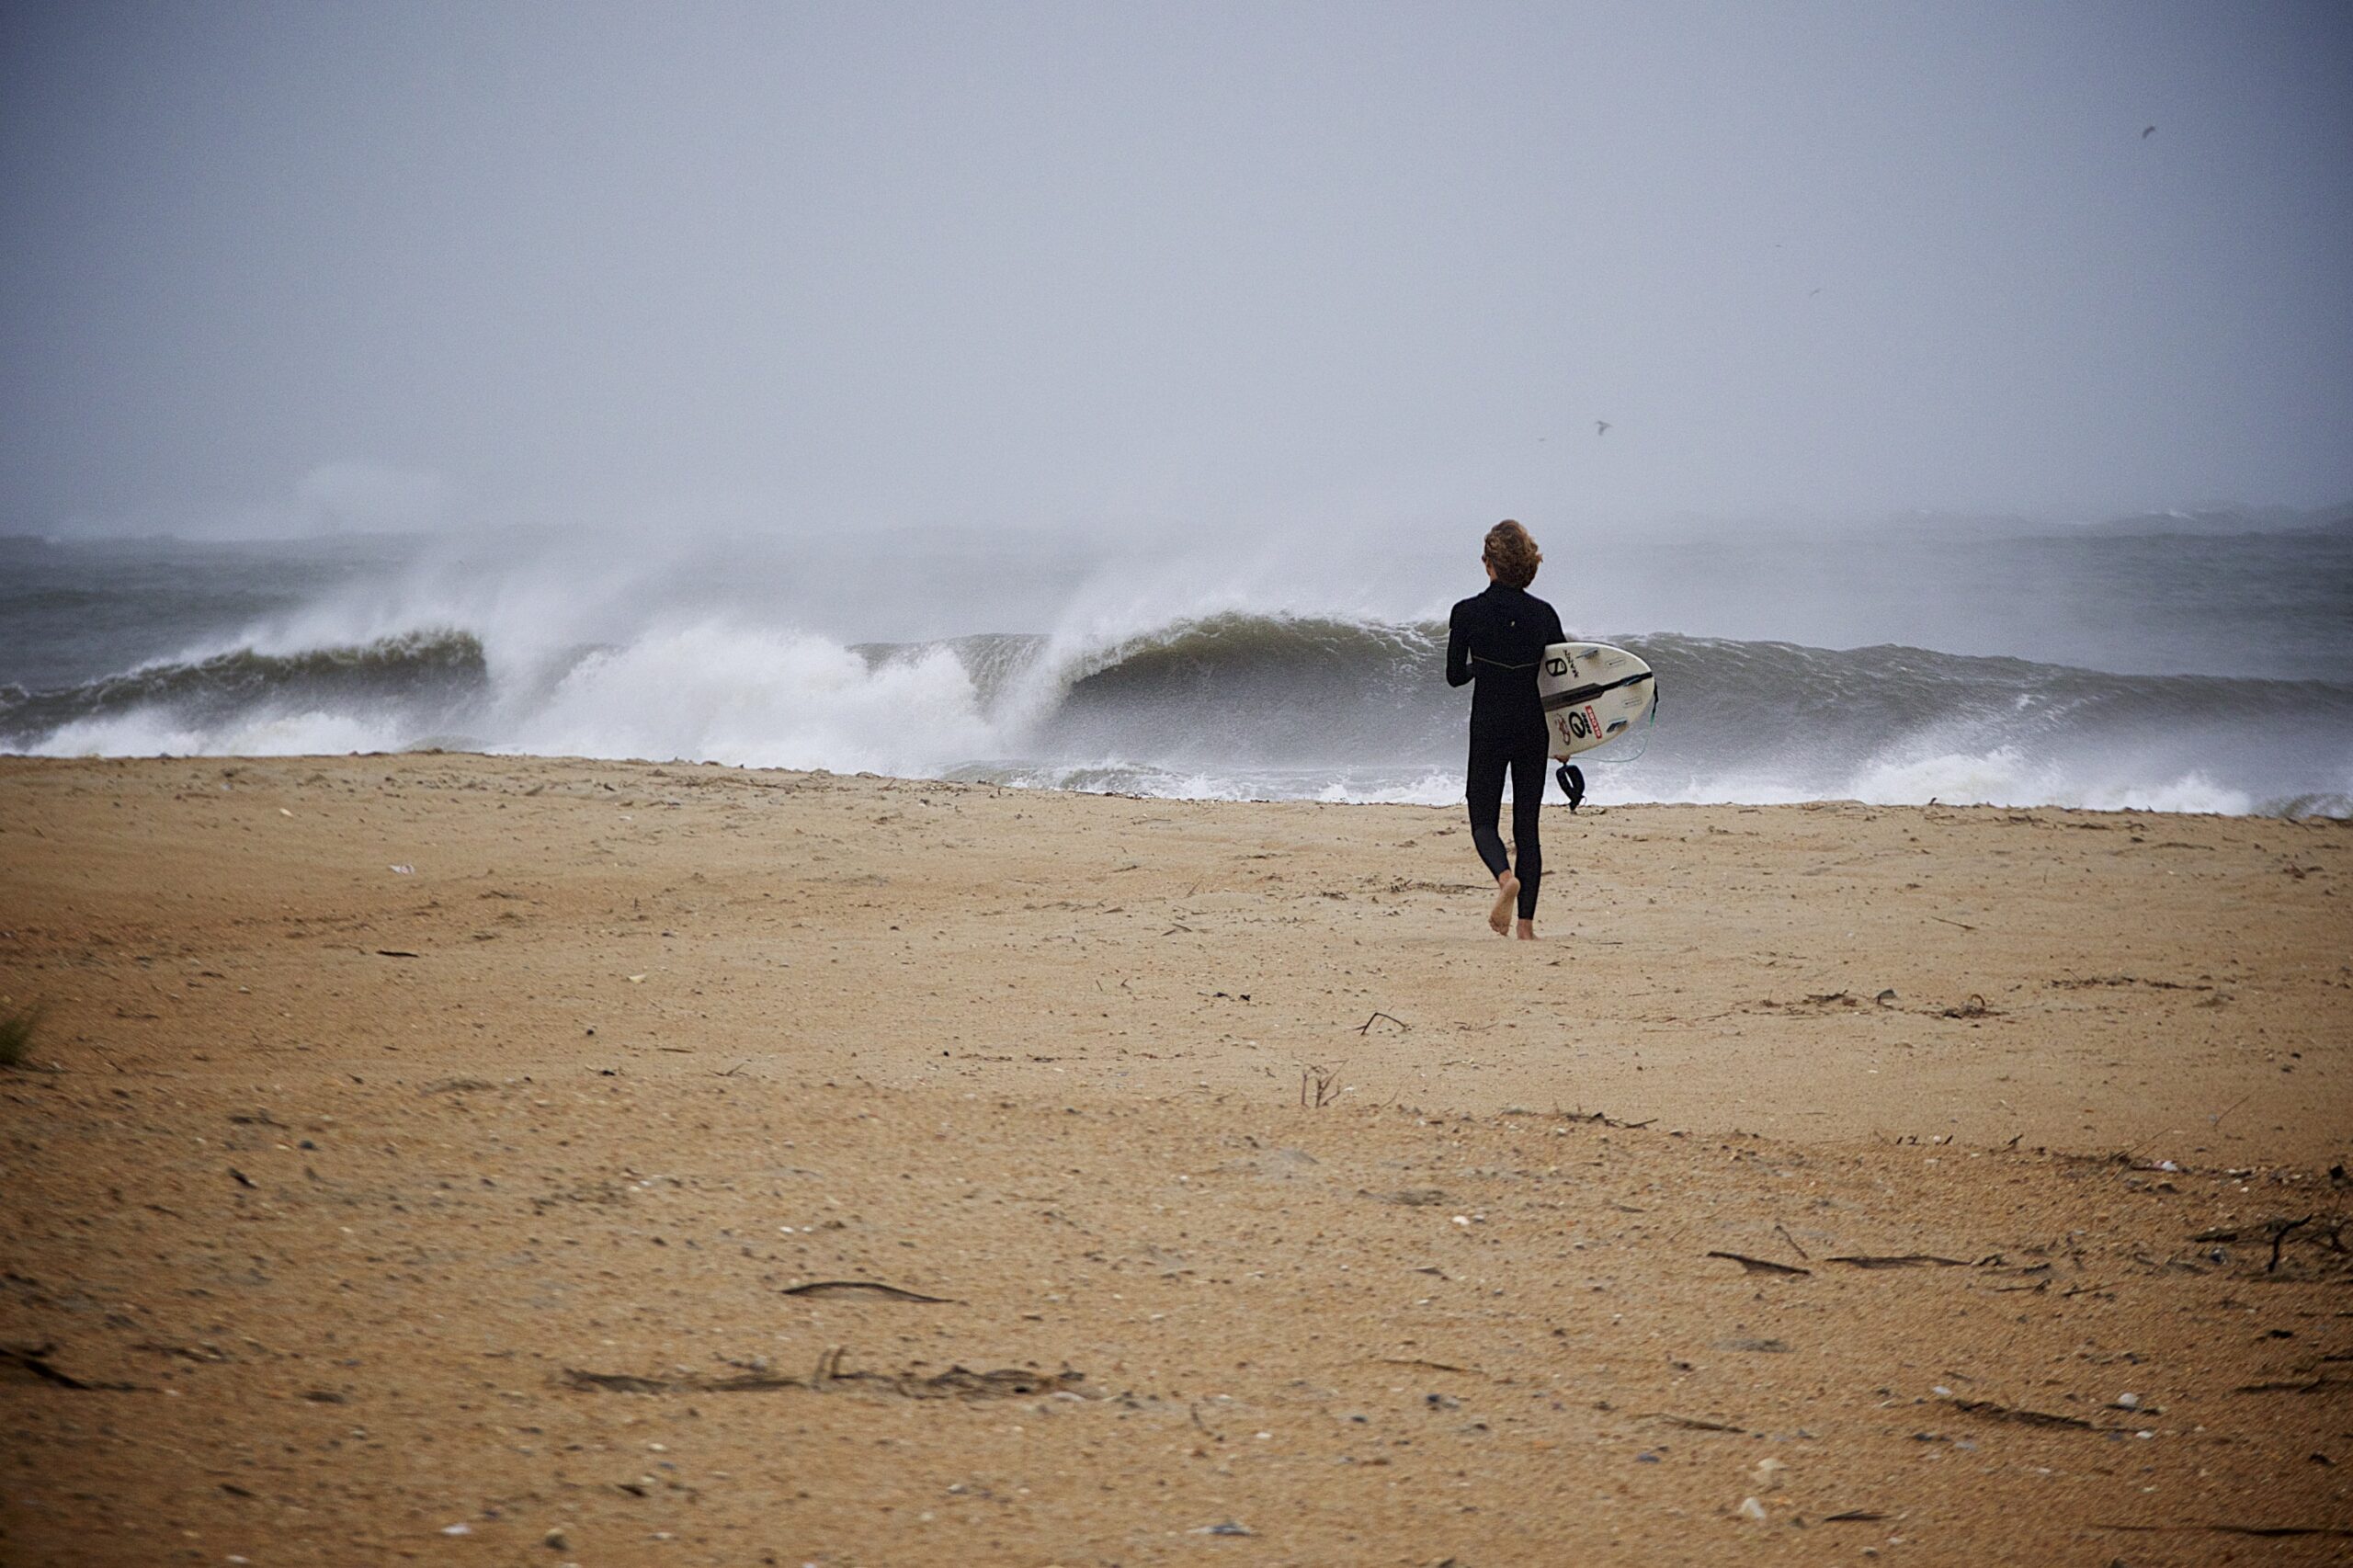 Swell Stories: Cape Hatteras National Seashore 10/10/21